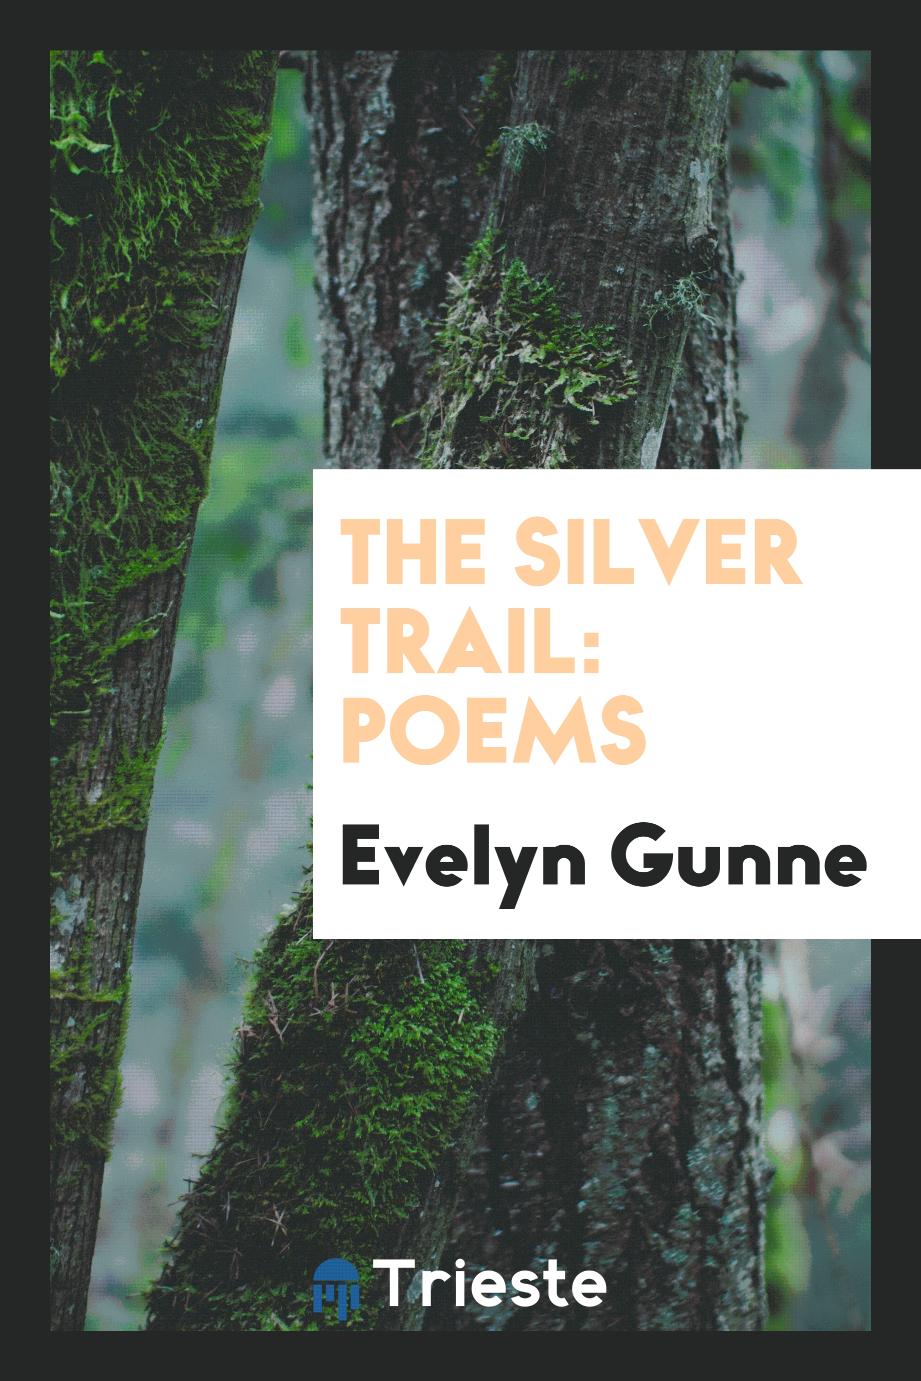 The Silver Trail: Poems